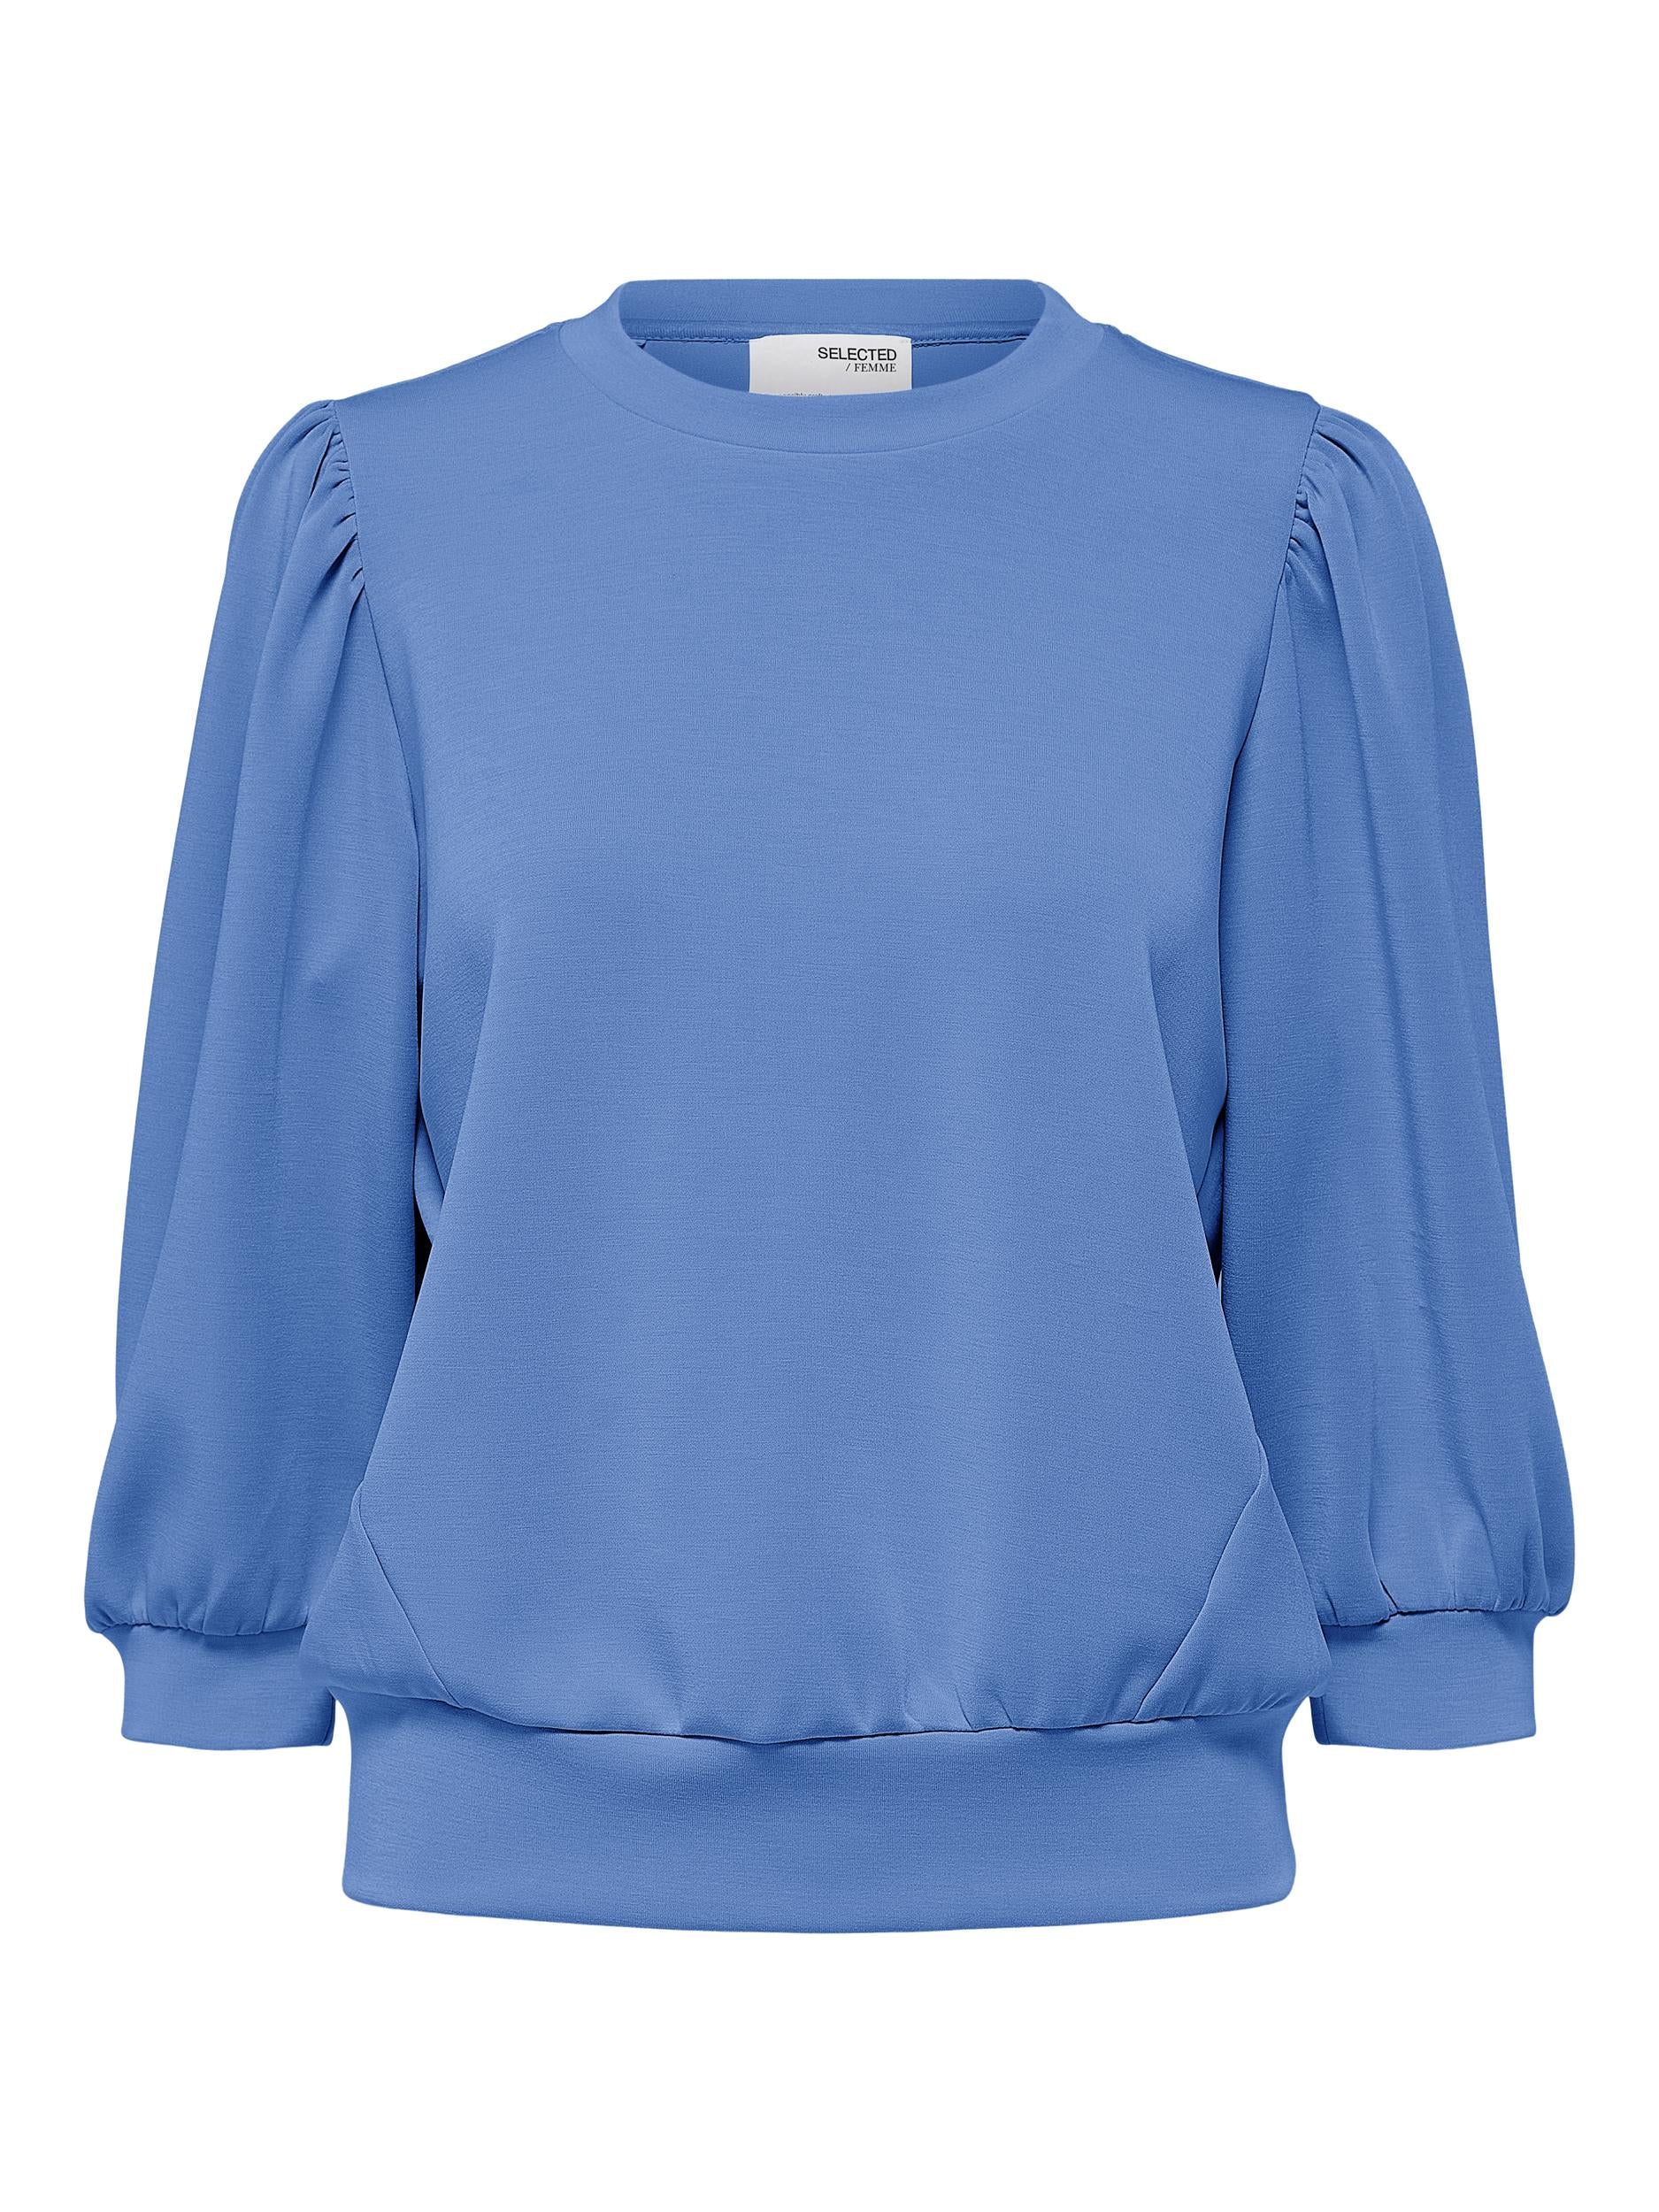 Selected Femme "Tenny" 3/4 Sweat Top